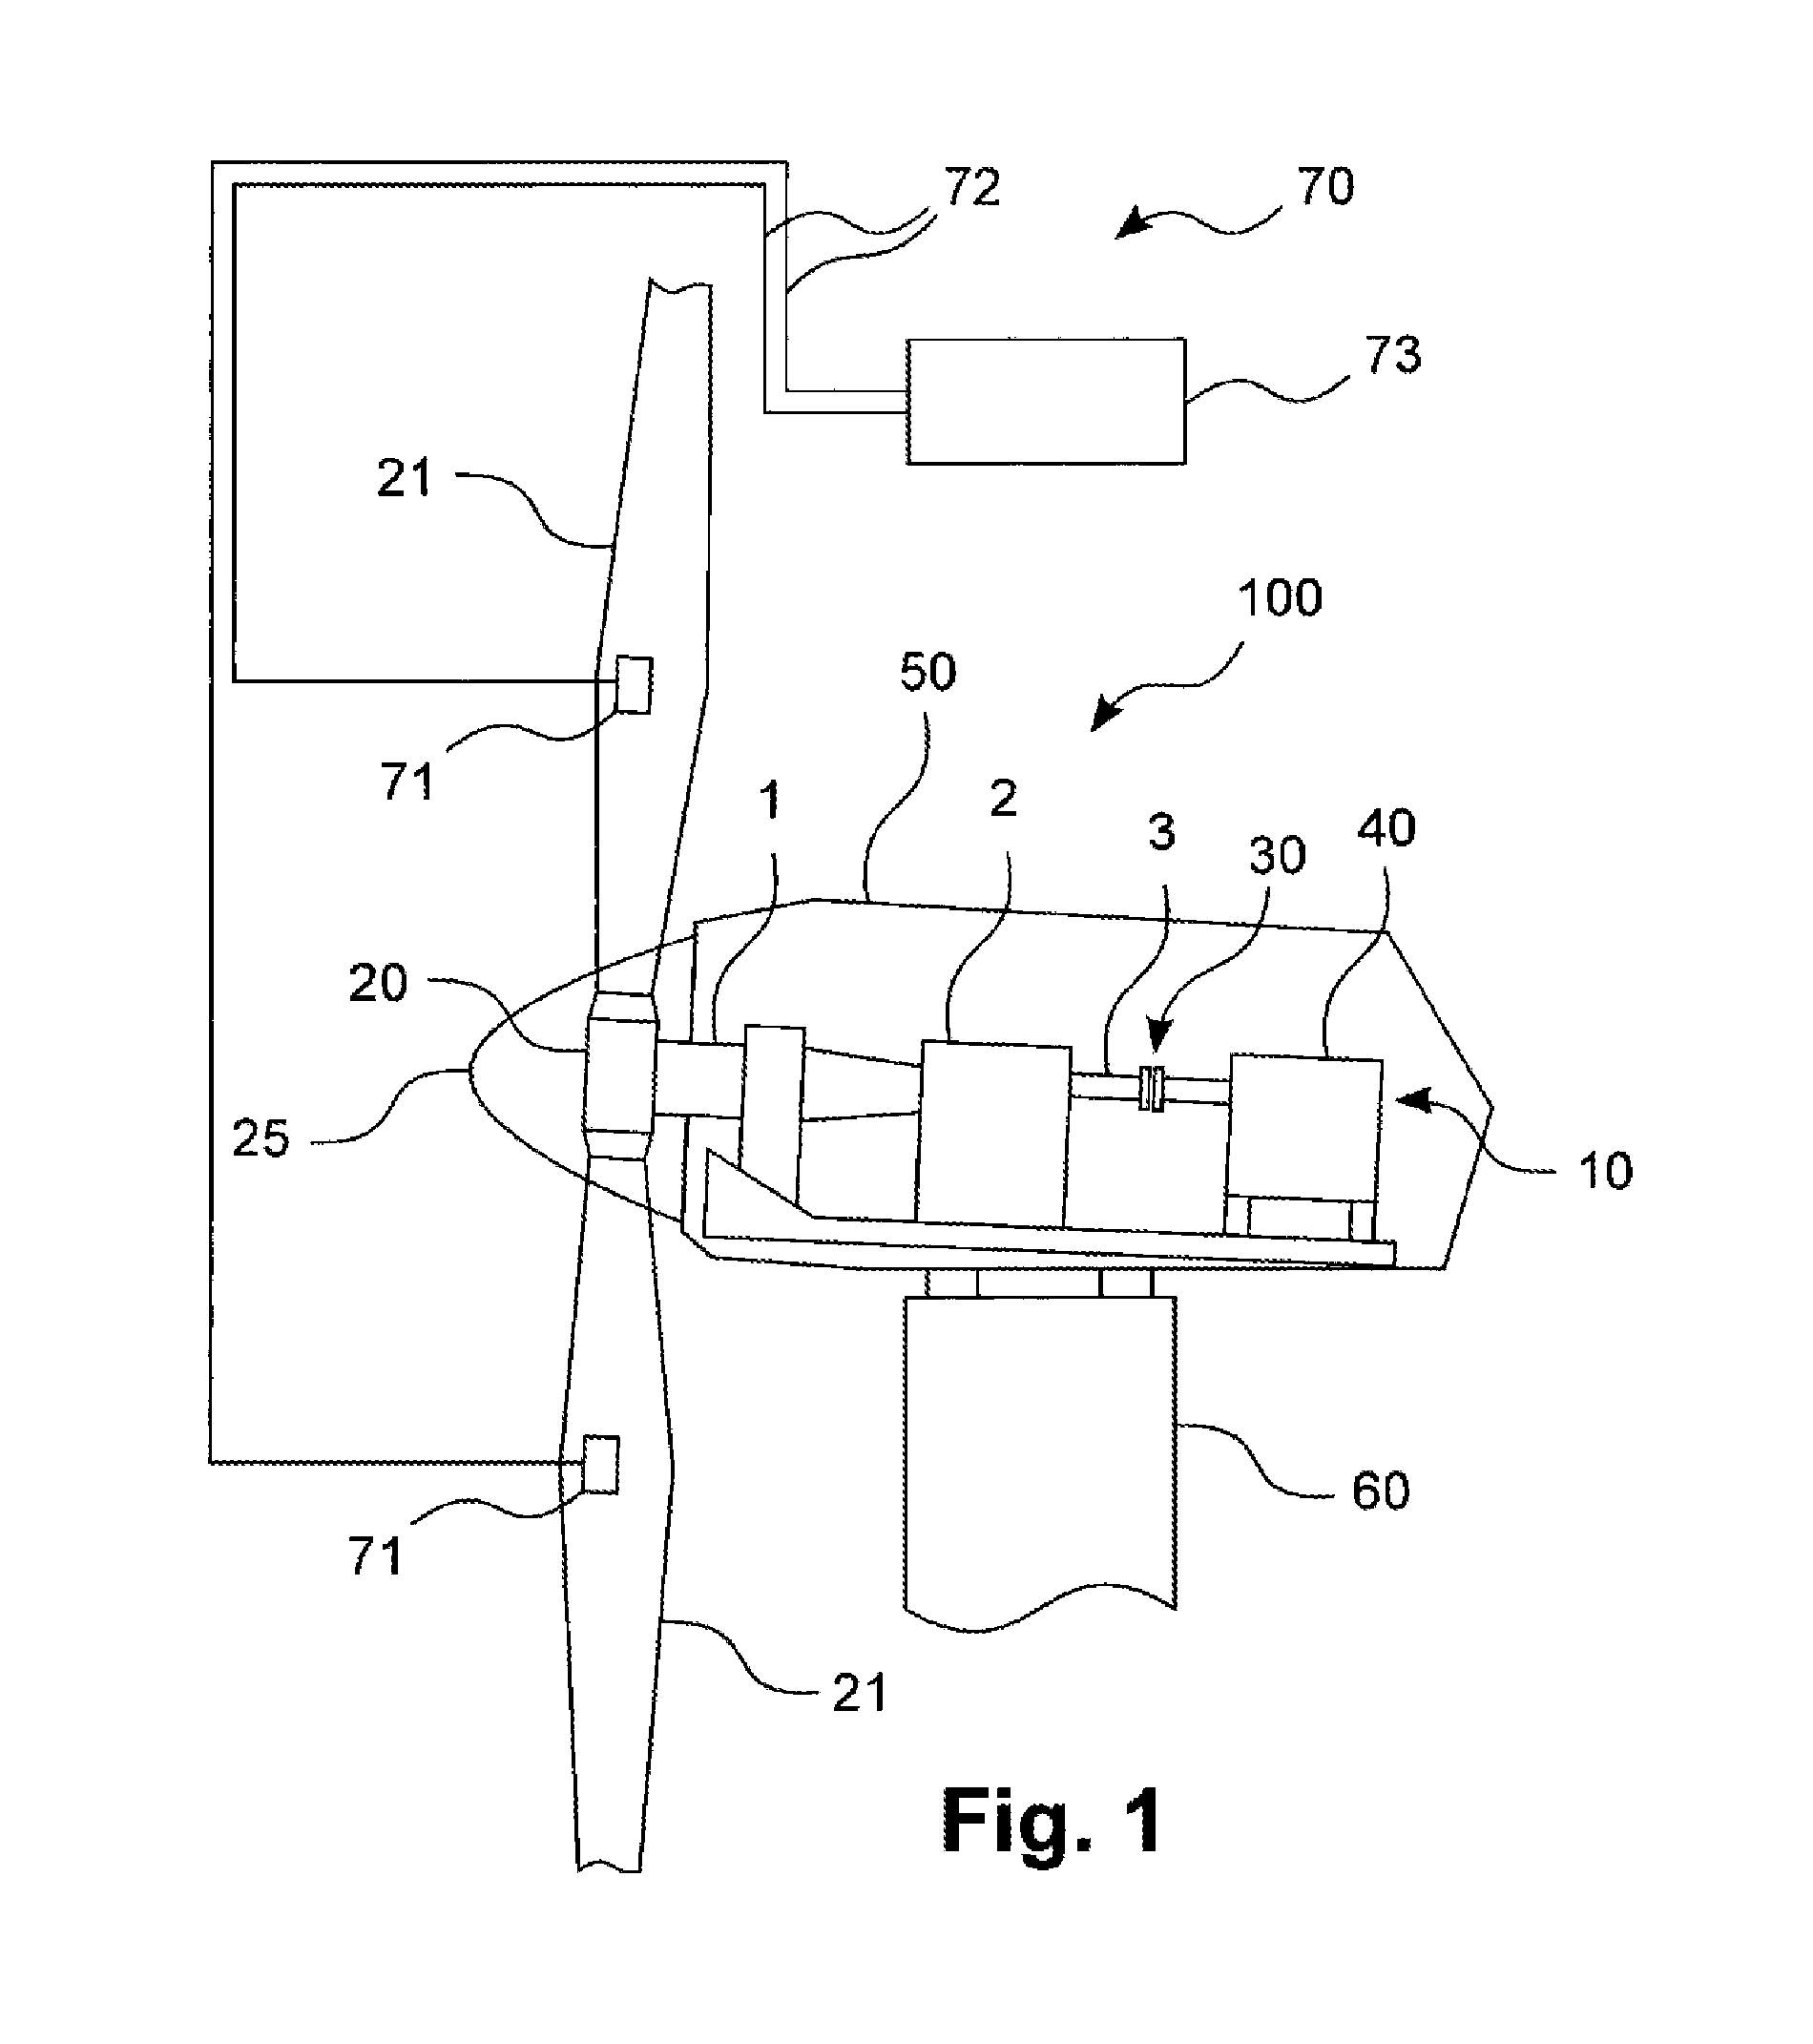 Method for determining mechanical damage to a rotor blade of a wind turbine